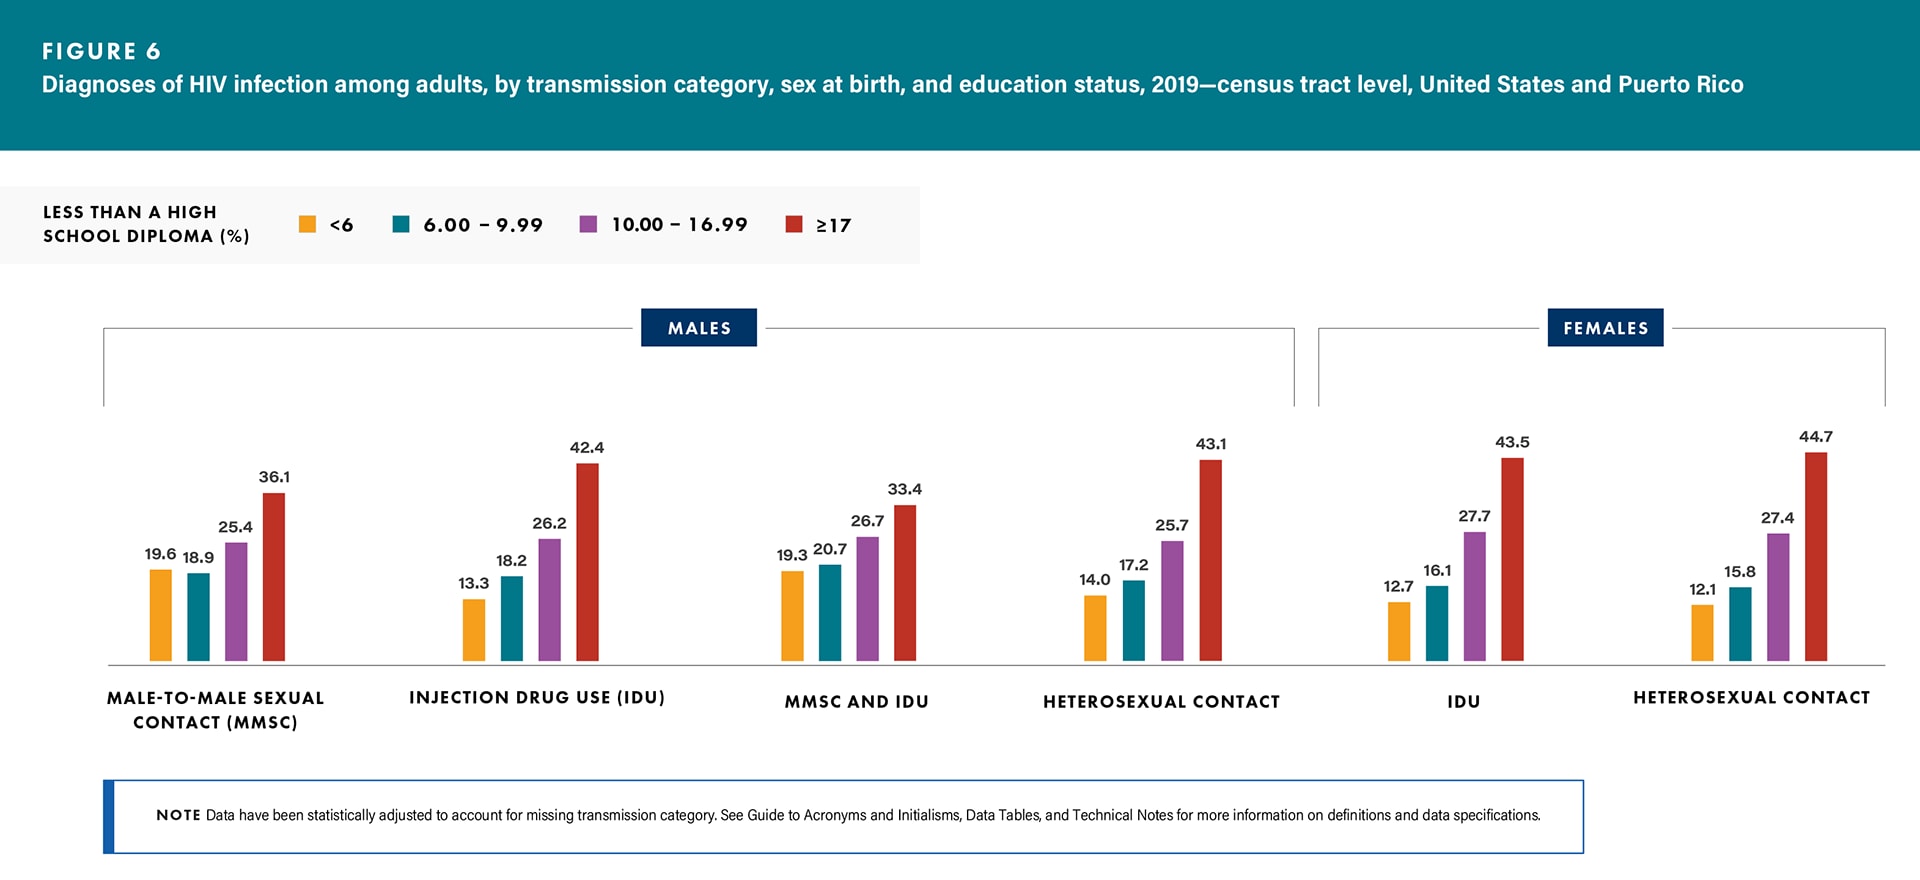 In 2019, adults who lived in census tracts with the lowest level of education (where 17 percent or more of the residents had less than a high school diploma) accounted for the highest HIV diagnosis rates for all transmission categories for both sexes.